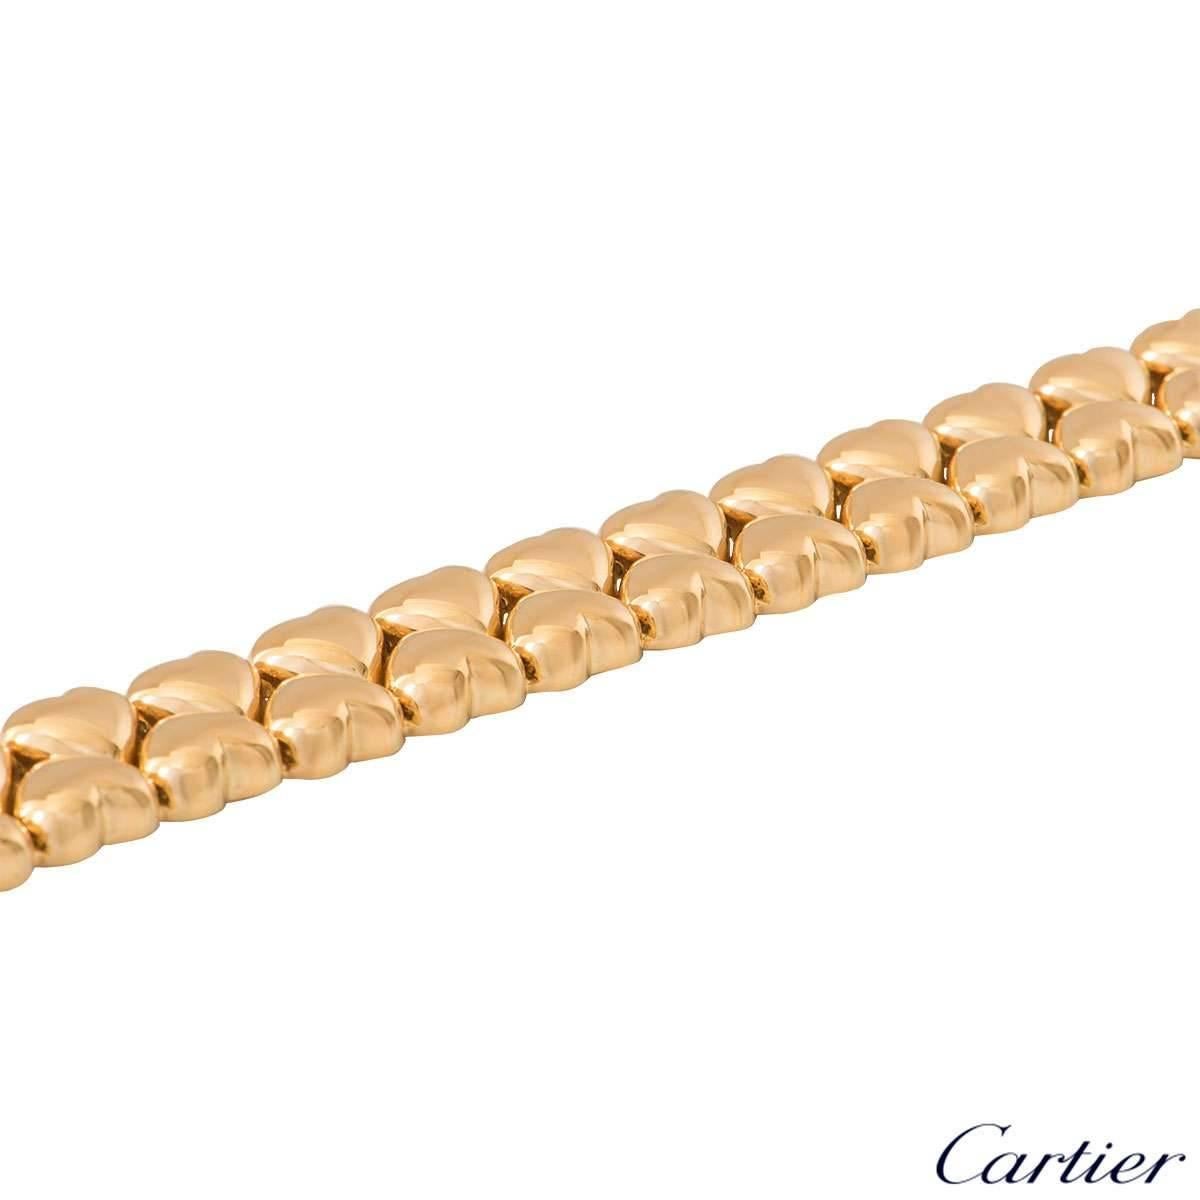 A Cartier 18k yellow gold heart link bracelet. The bracelet features 42 polished adjacently set heart link motifs. The bracelet measures 7 inches in length and 1.3cm in width with a gross weight of 41.95 grams.

The bracelet comes complete with a